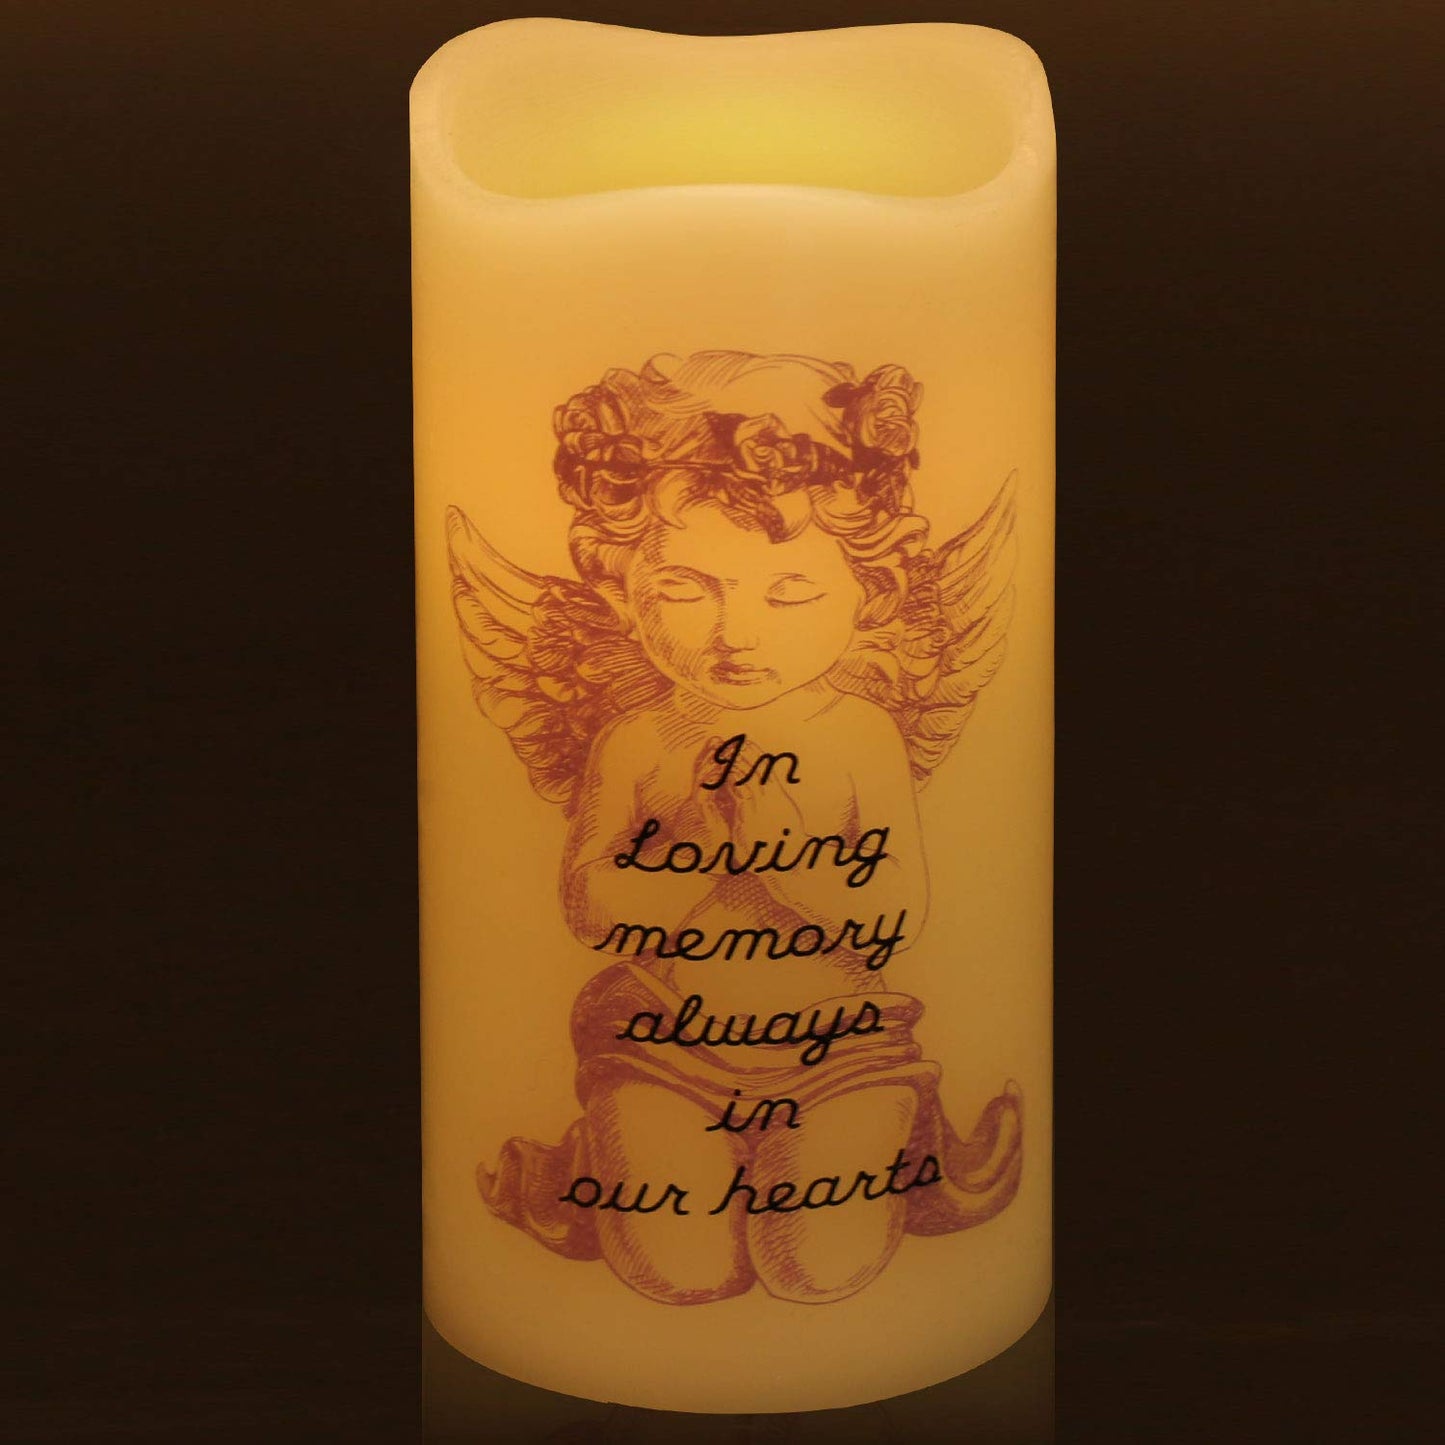 Votive Candles Bulk Battery Operated Memorial Candle for Loss of Loved One LED Flameless Candles Pillar Real Wax Flickering Electric Celebration of Life Decorations Angel Remembrance Funeral Gifts